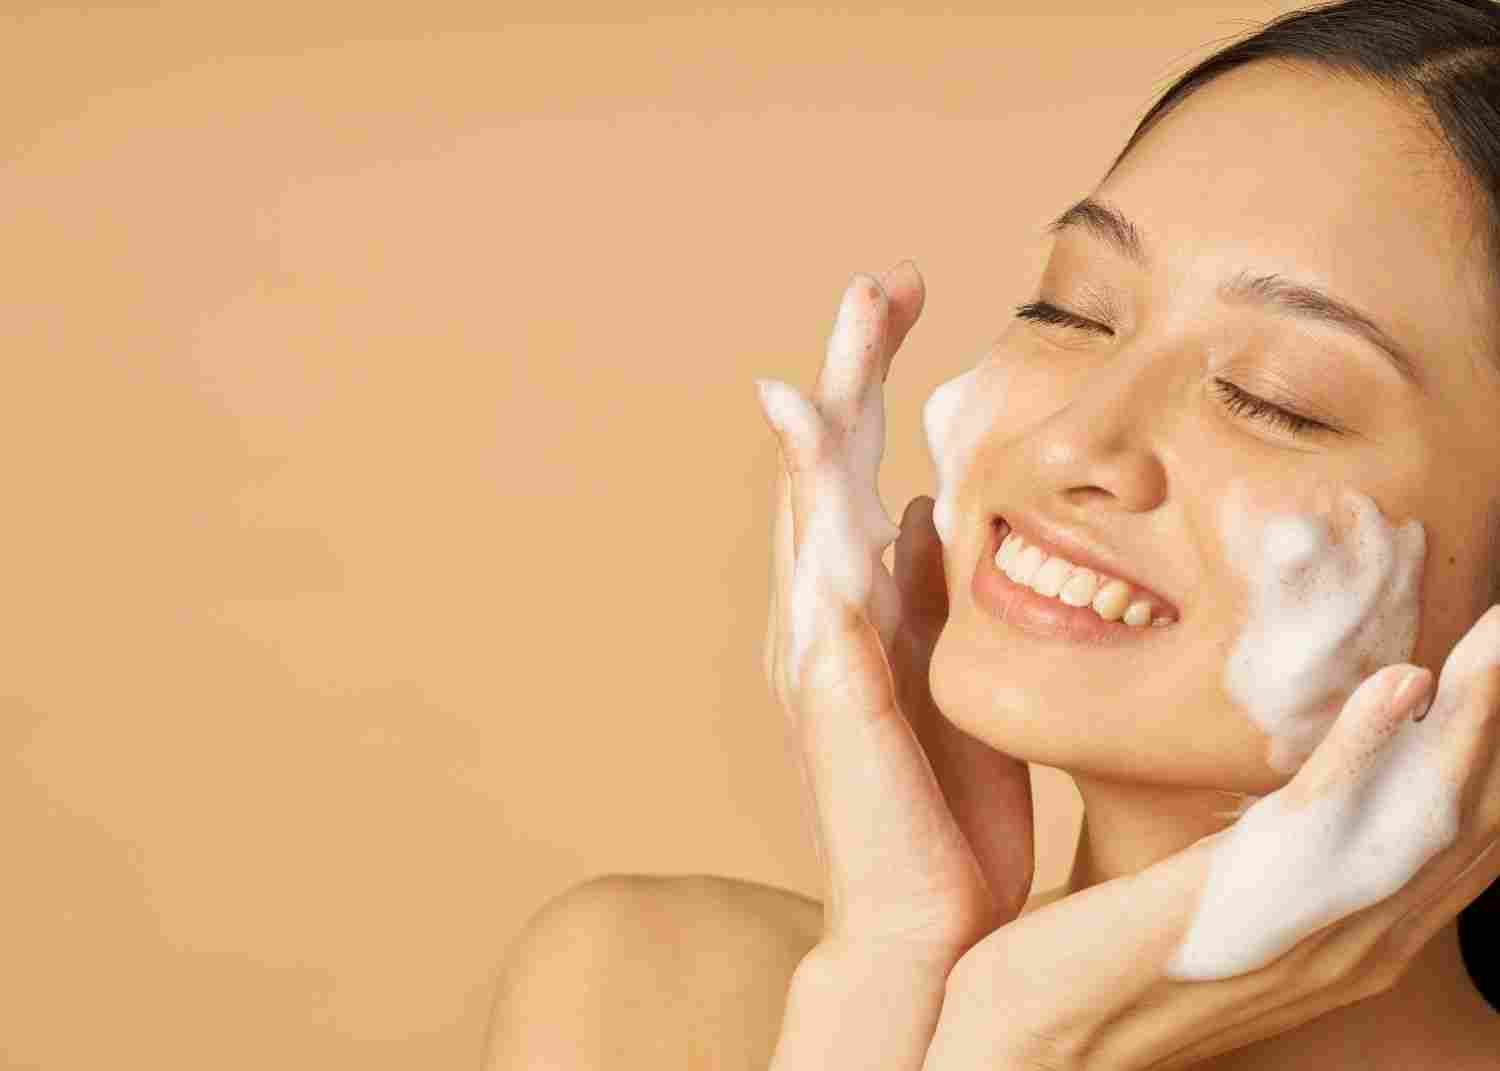 Facial Cleansers vs. Exfoliators: What's the Difference?